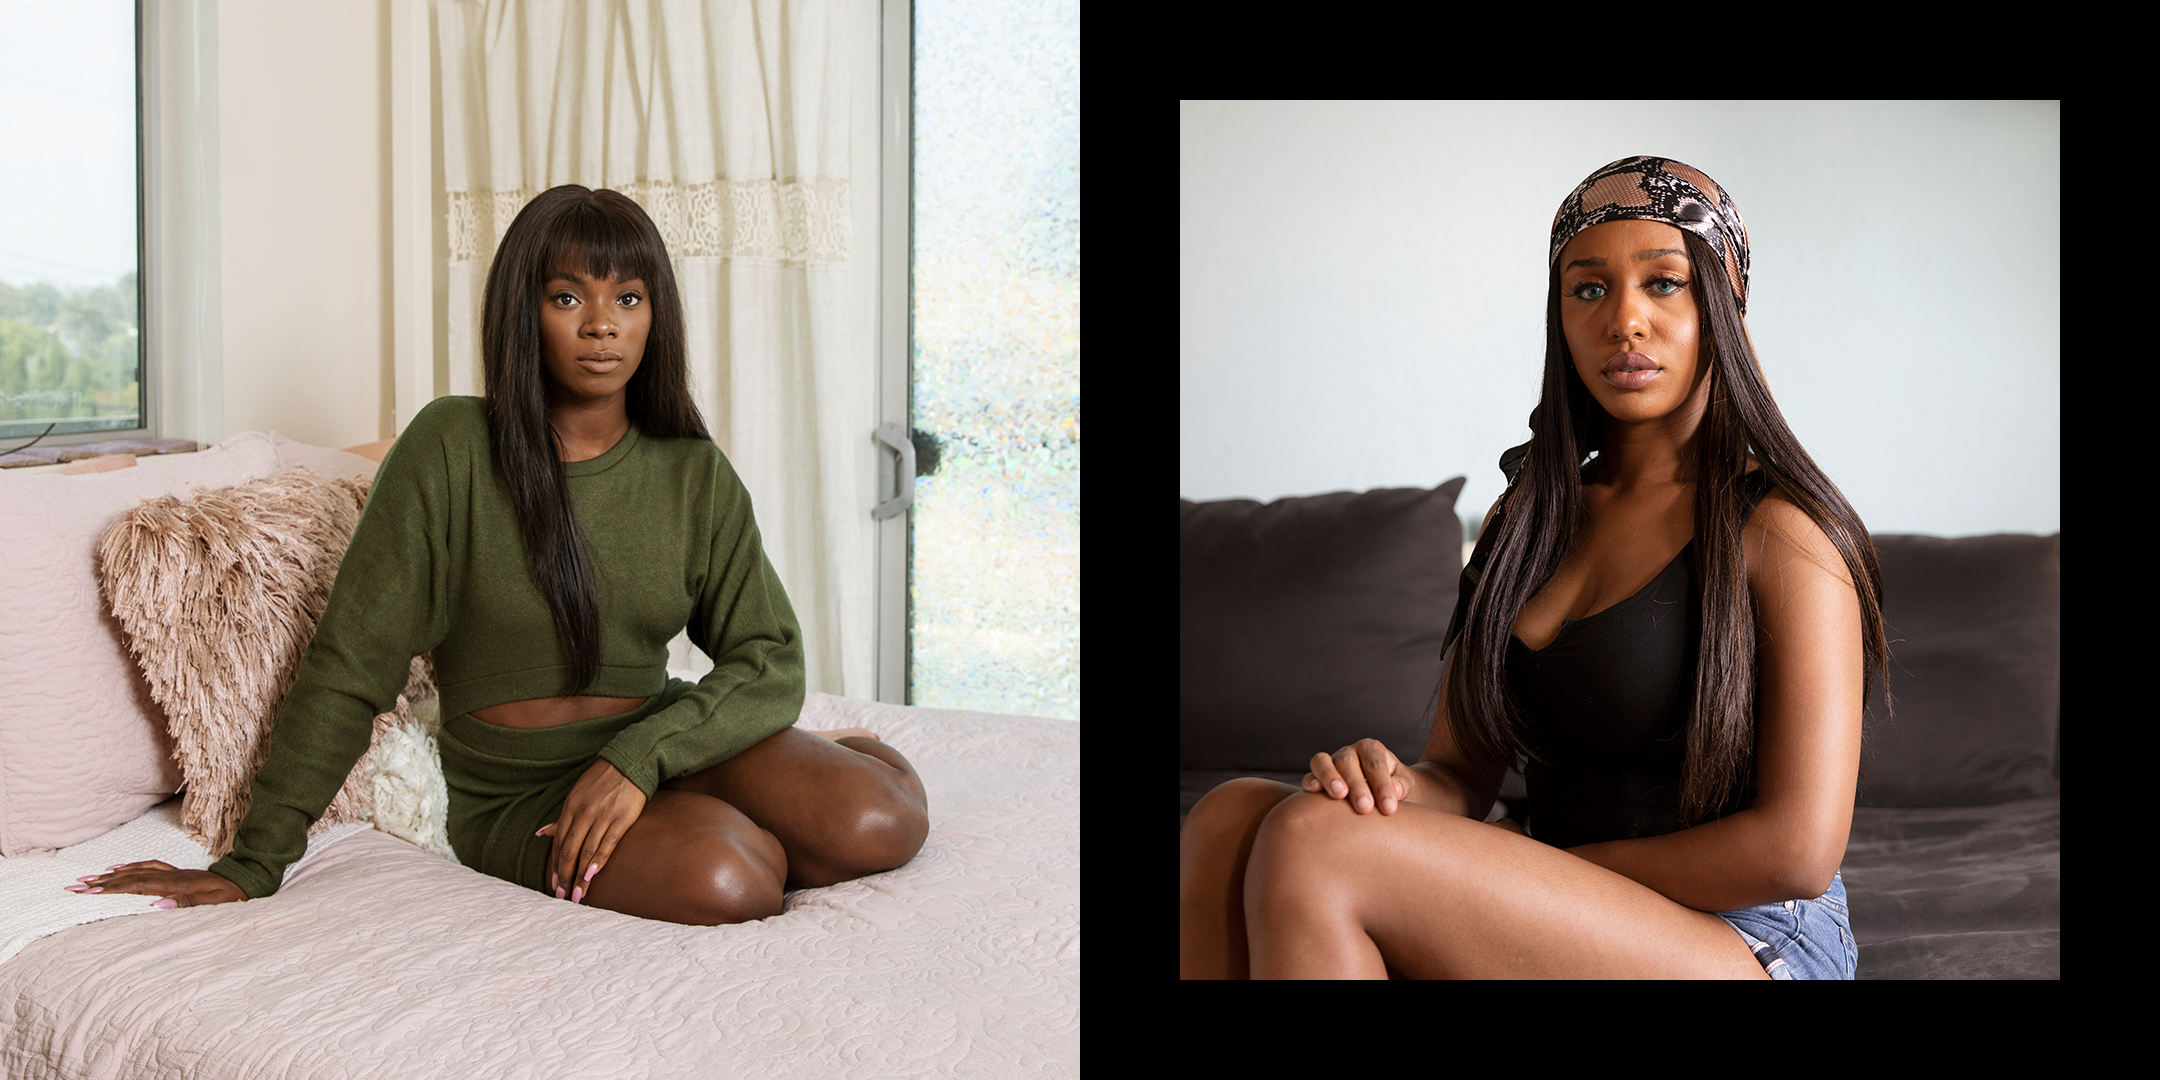 Black Women Describe Blatant Discrimination and Racism in Porn Industry